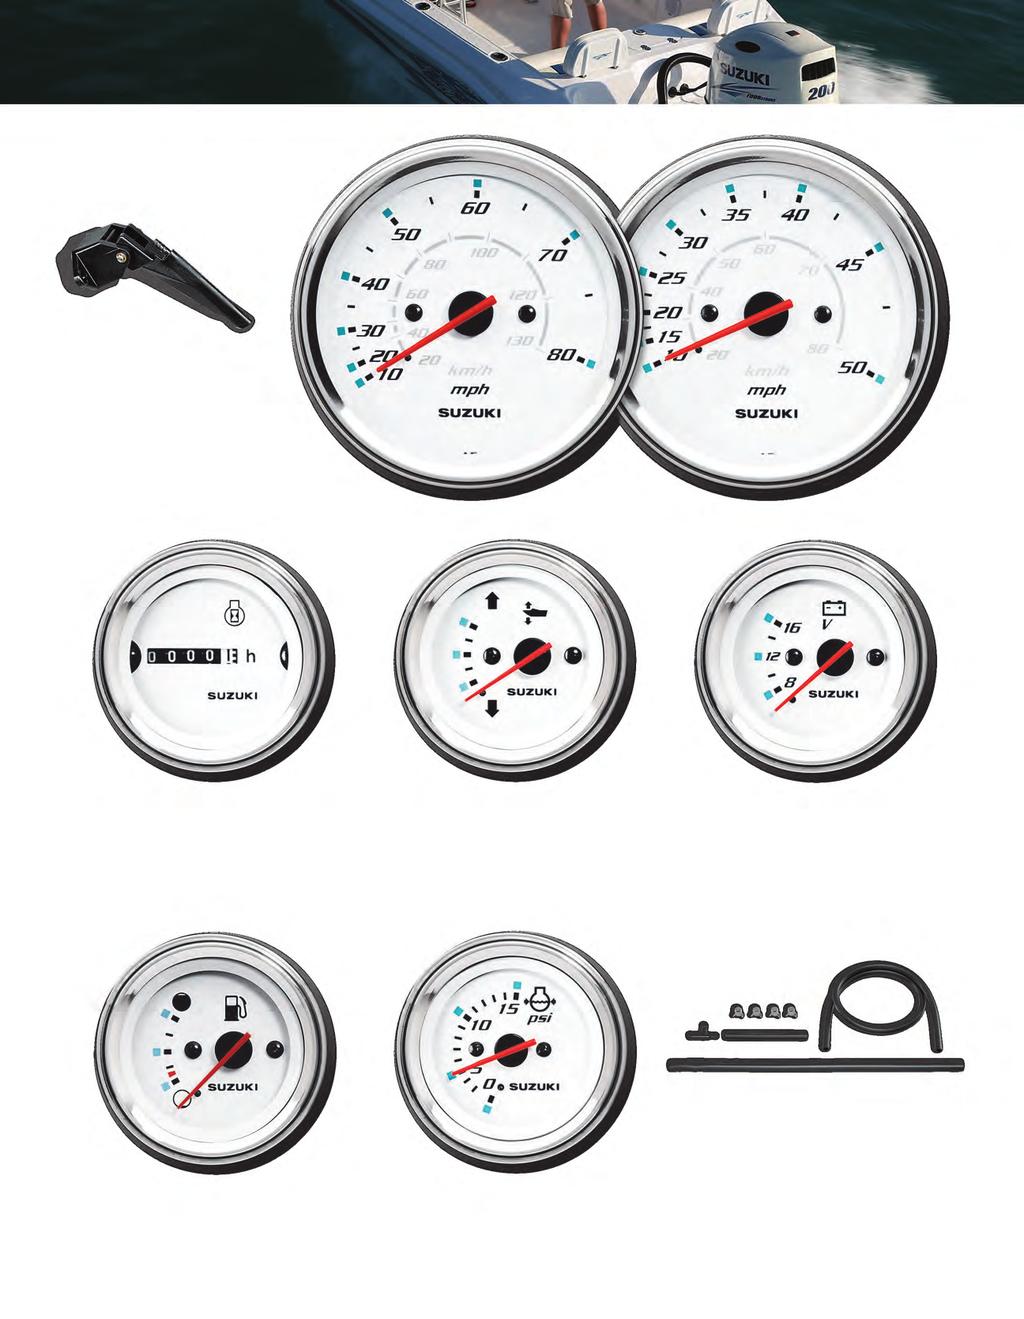 3 4 5 2 1 0 12 13 4 Speedometers Bourdon-tube type speedometer with readings in M.P.H. and Km/h. Includes vinyl tube, plus all installation instructions and hardware.